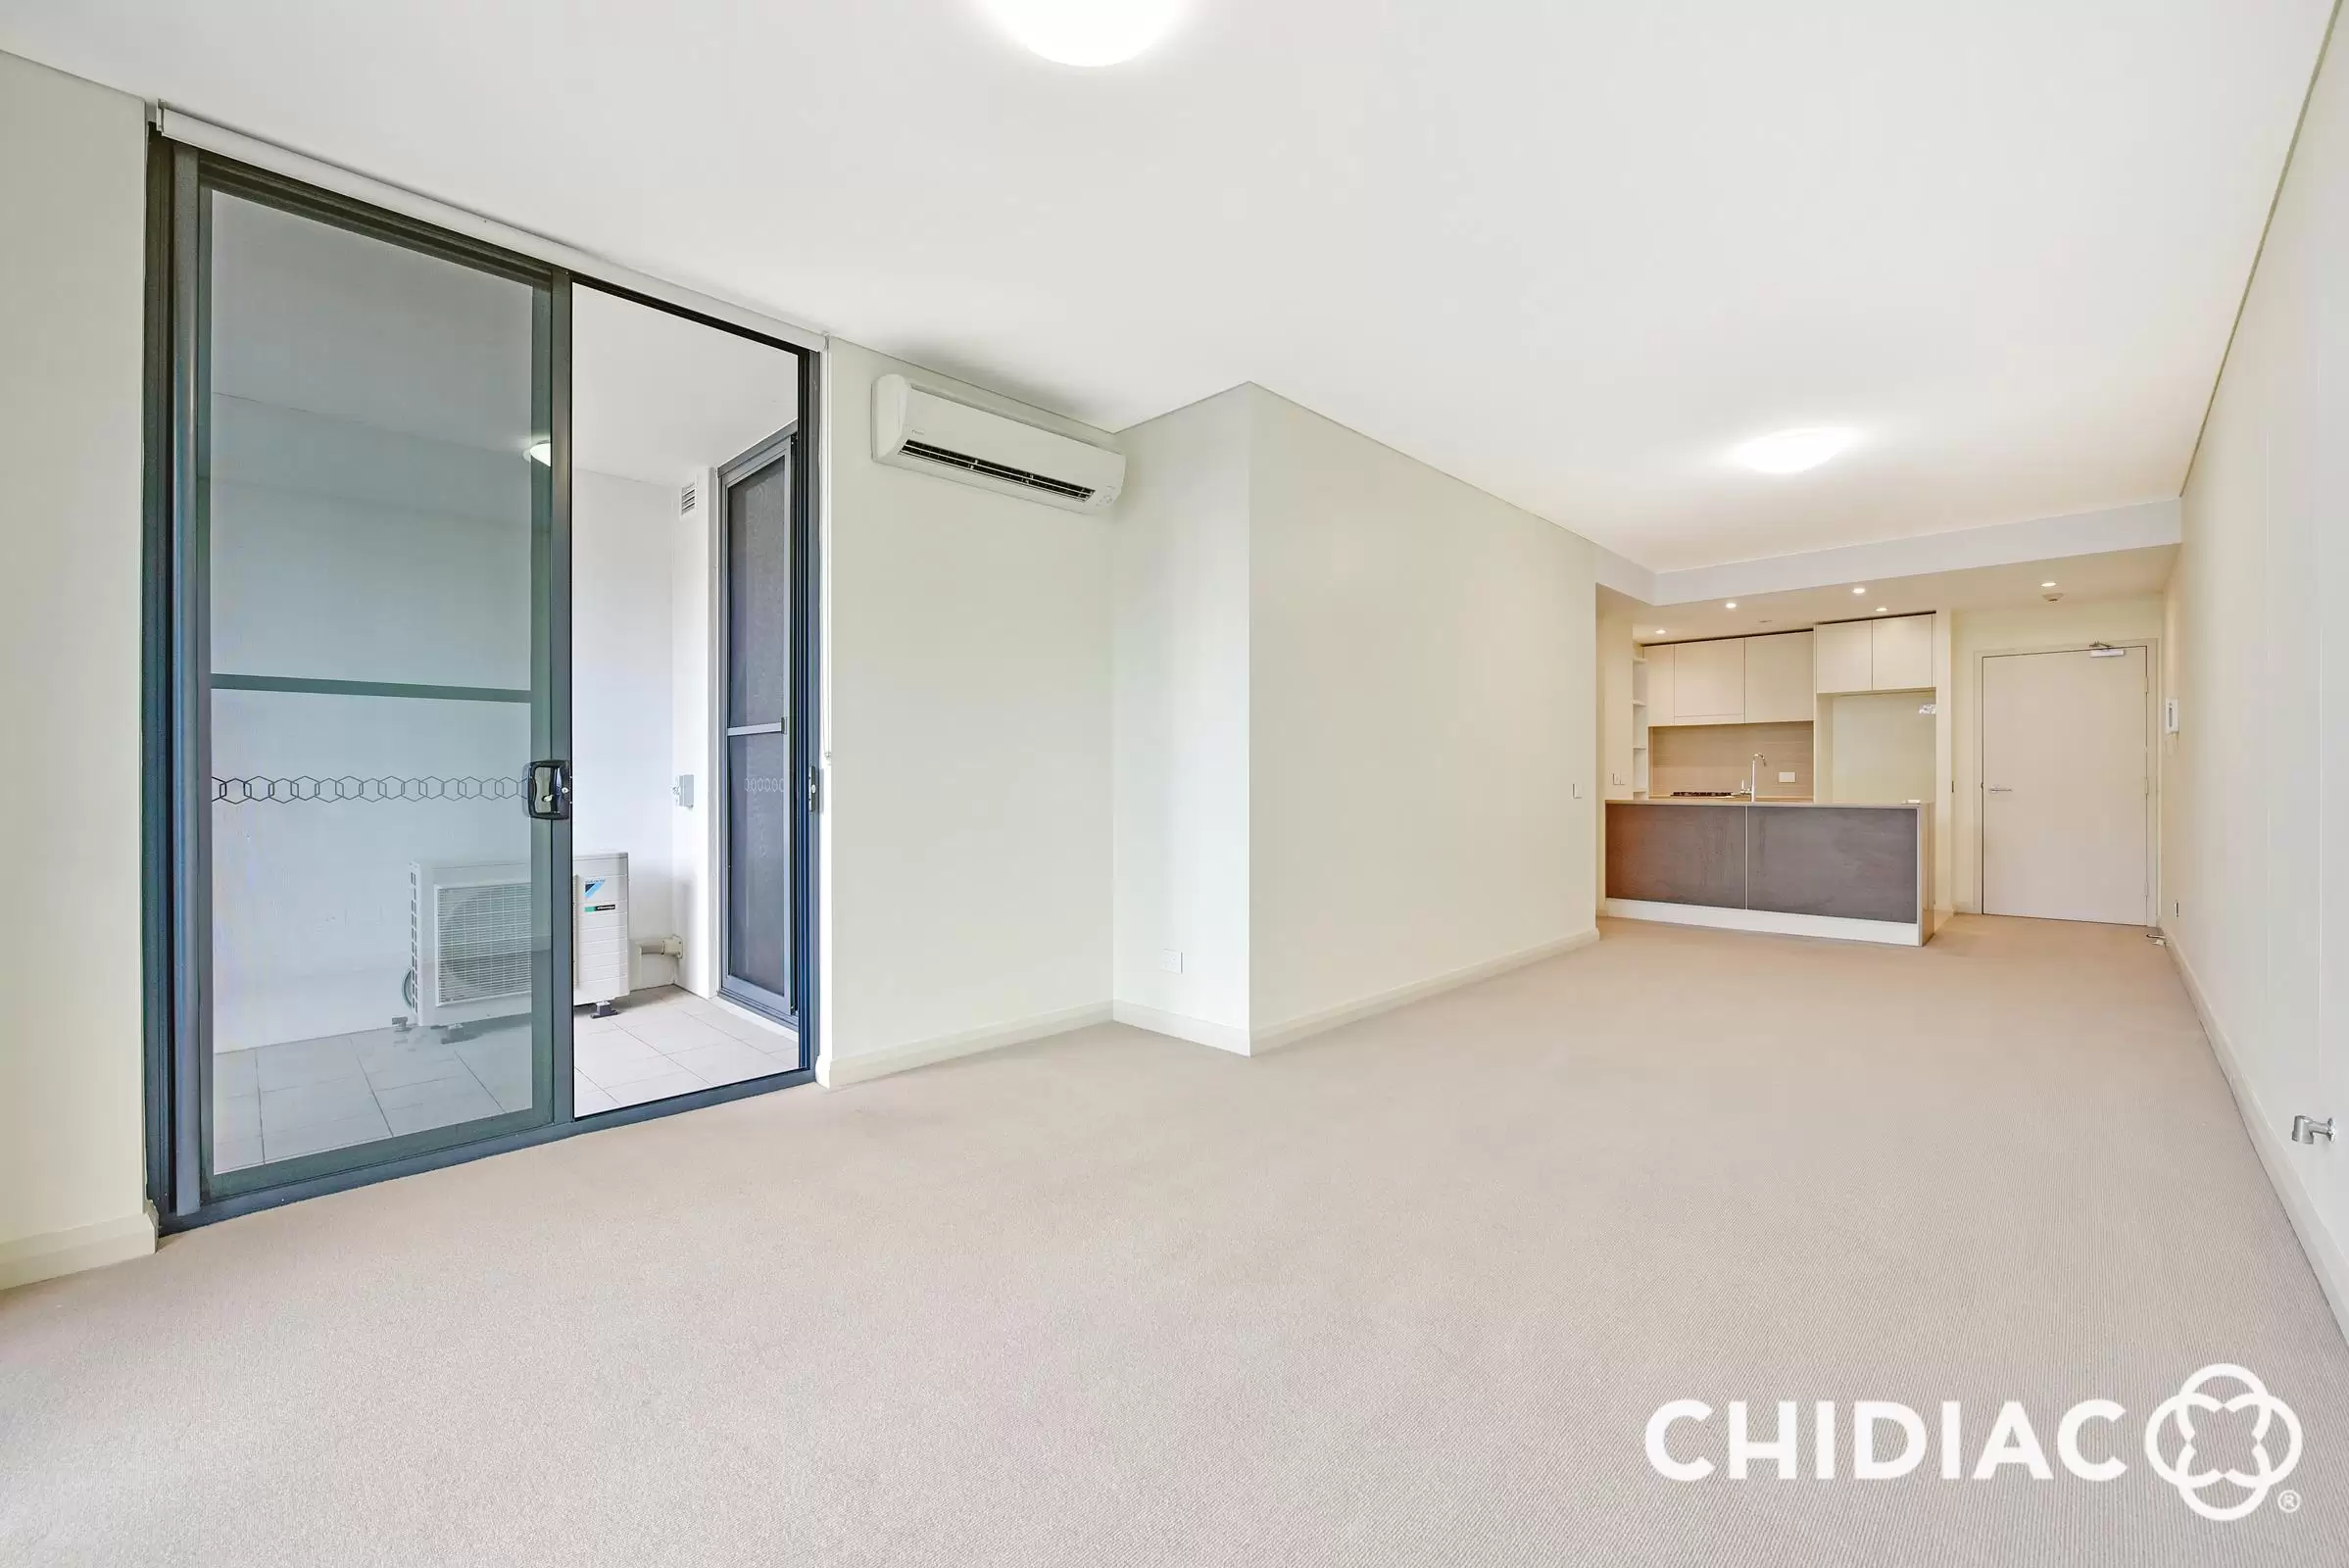 209/48 Amalfi Drive, Wentworth Point Leased by Chidiac Realty - image 2